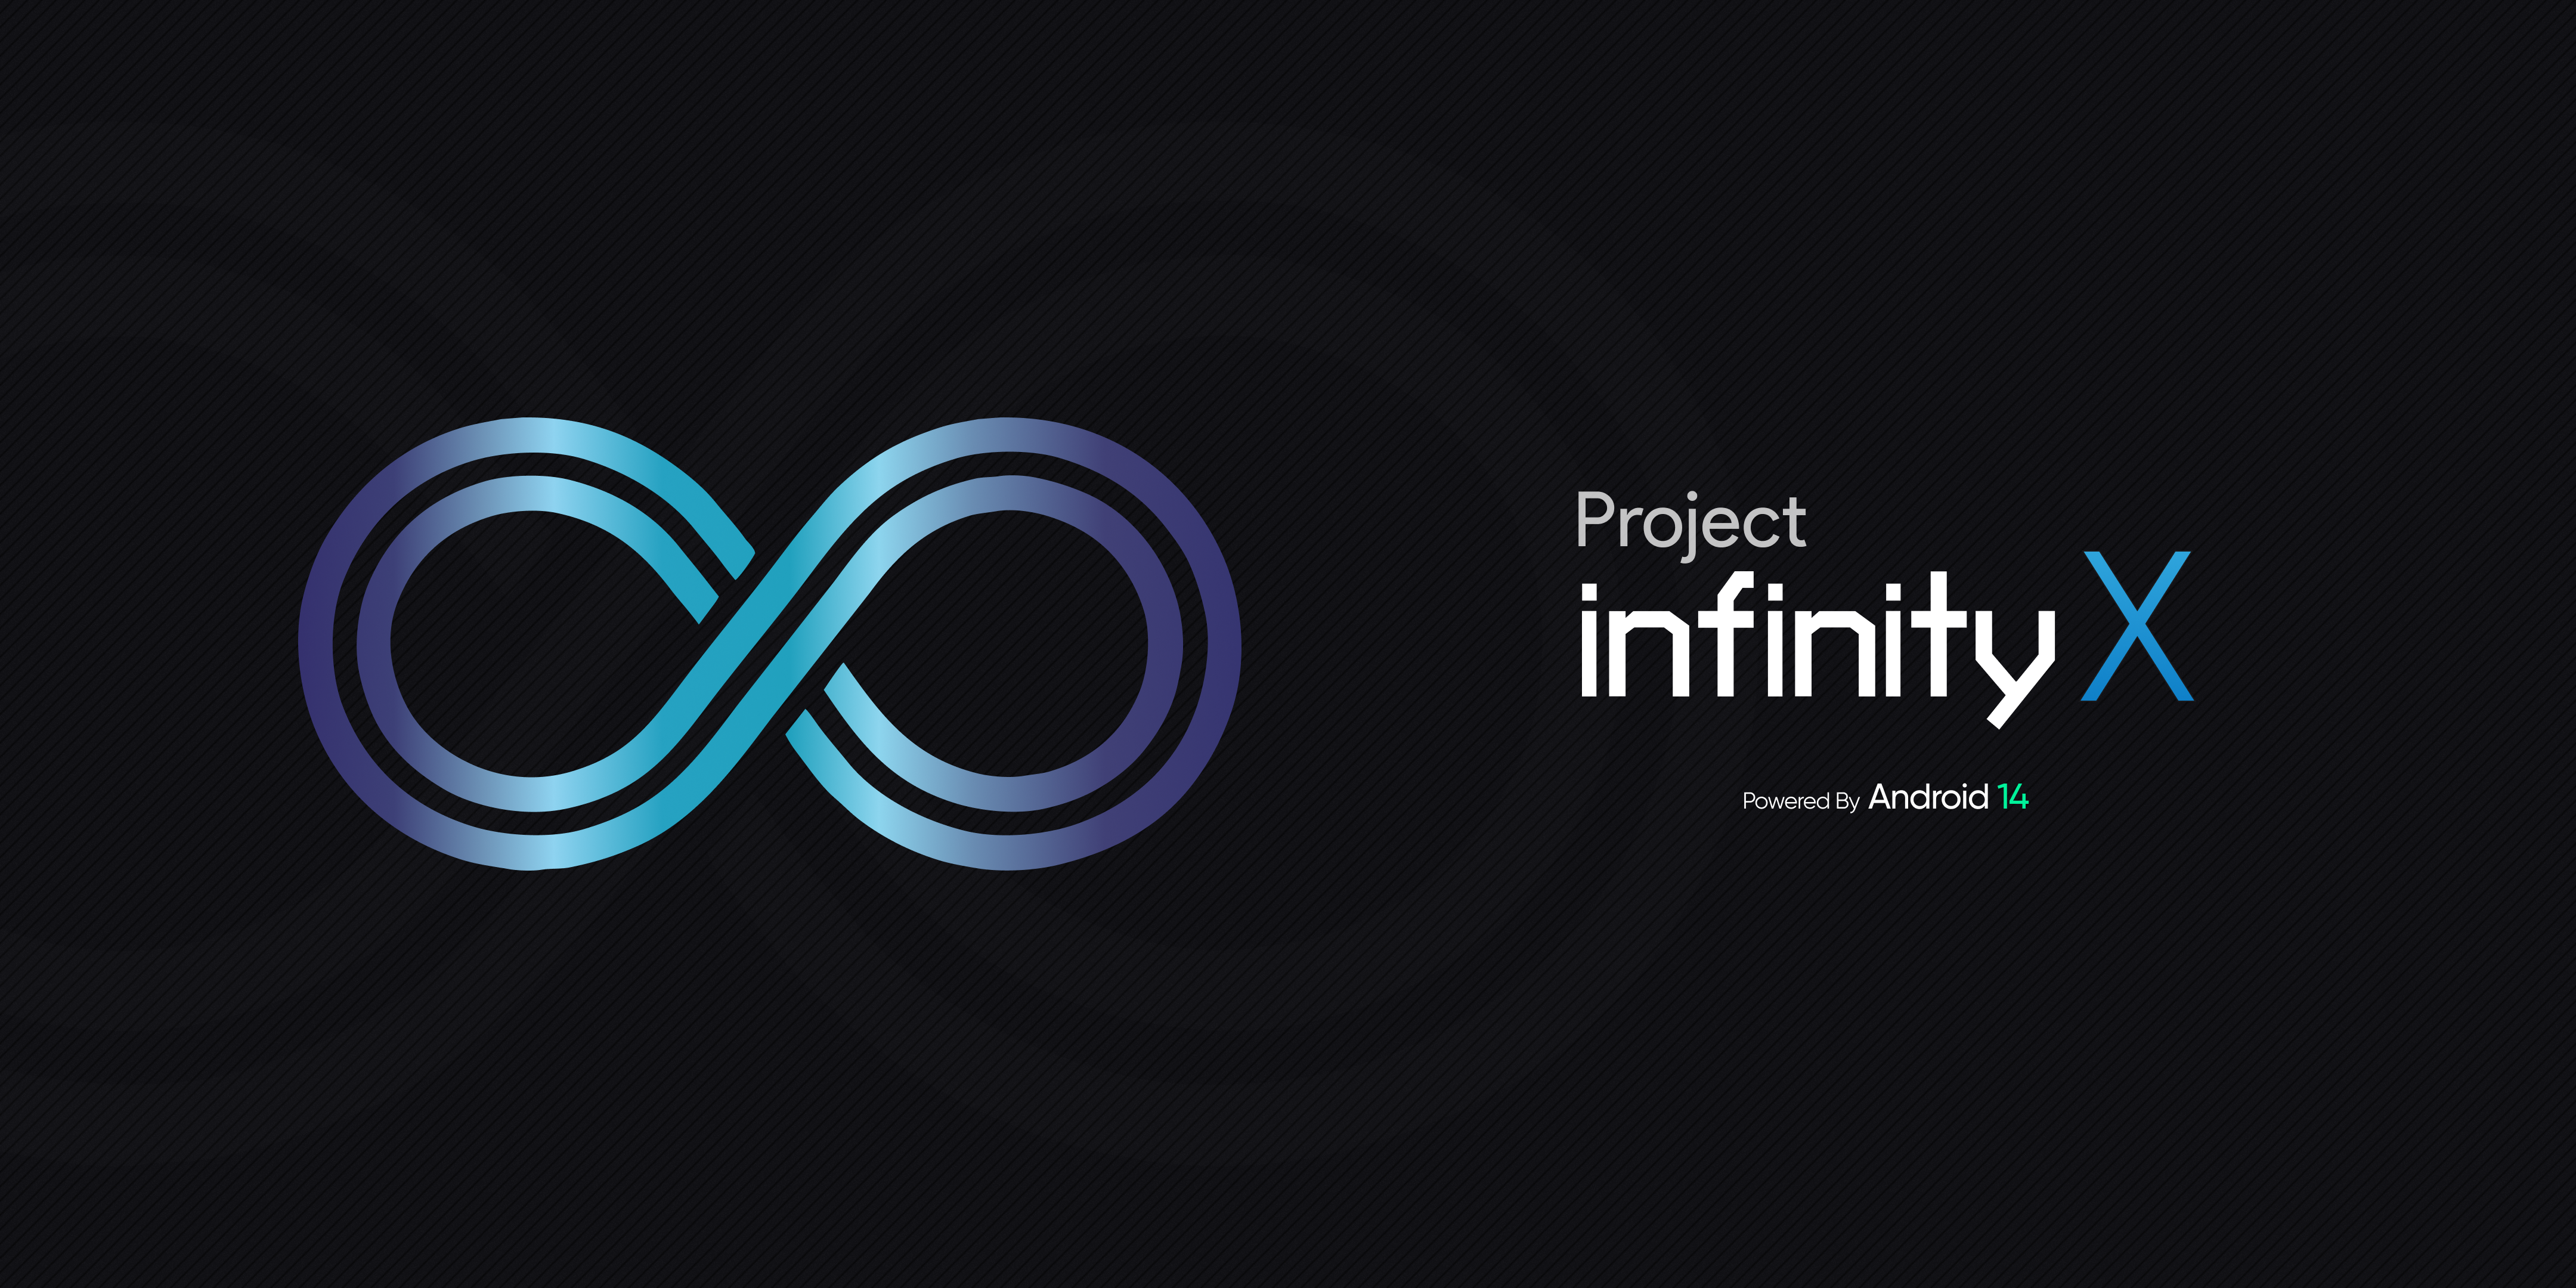 Project Infinity X